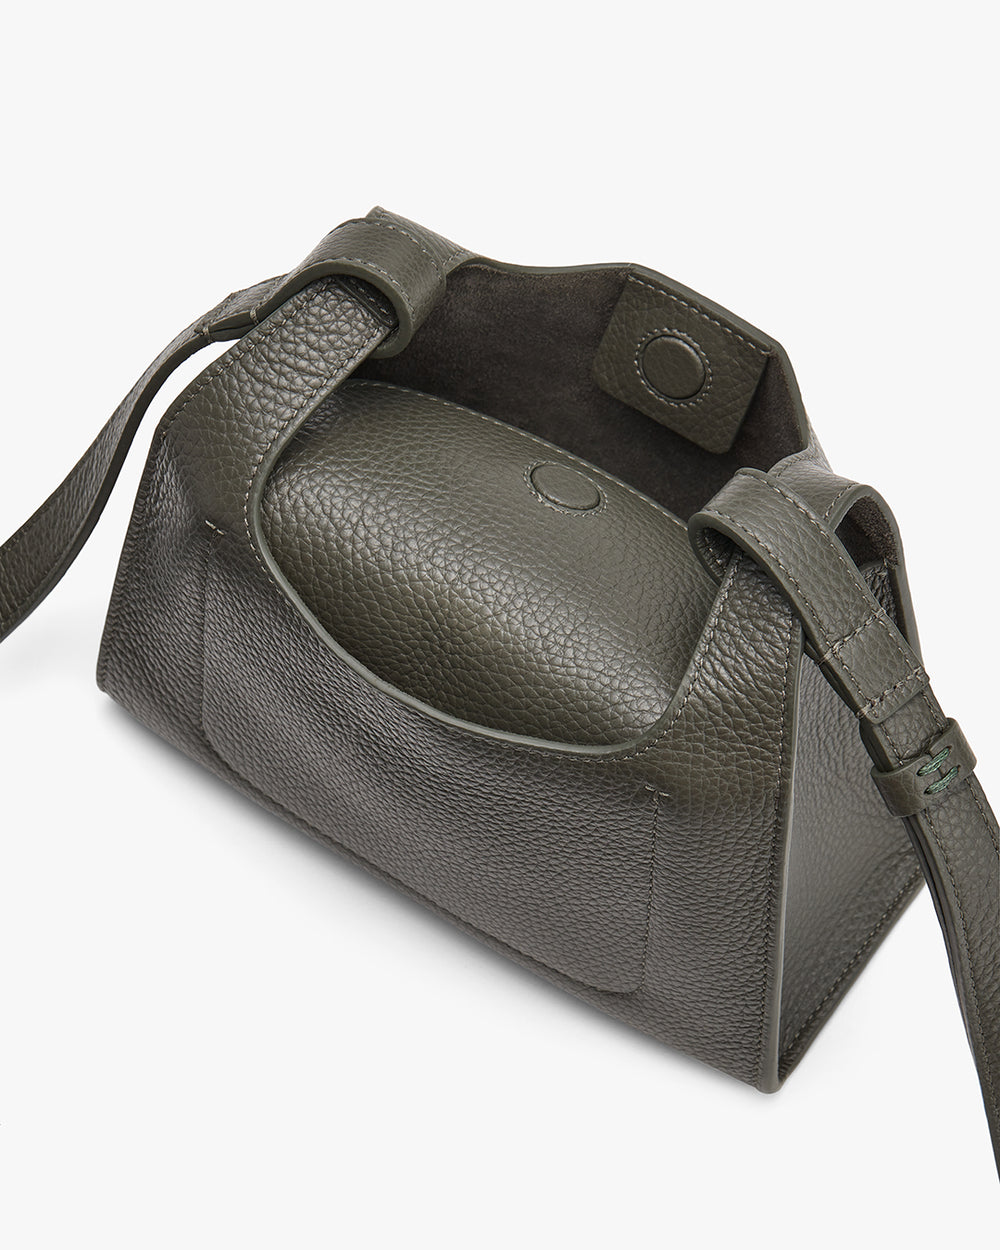 Open handbag with a flap and shoulder strap.